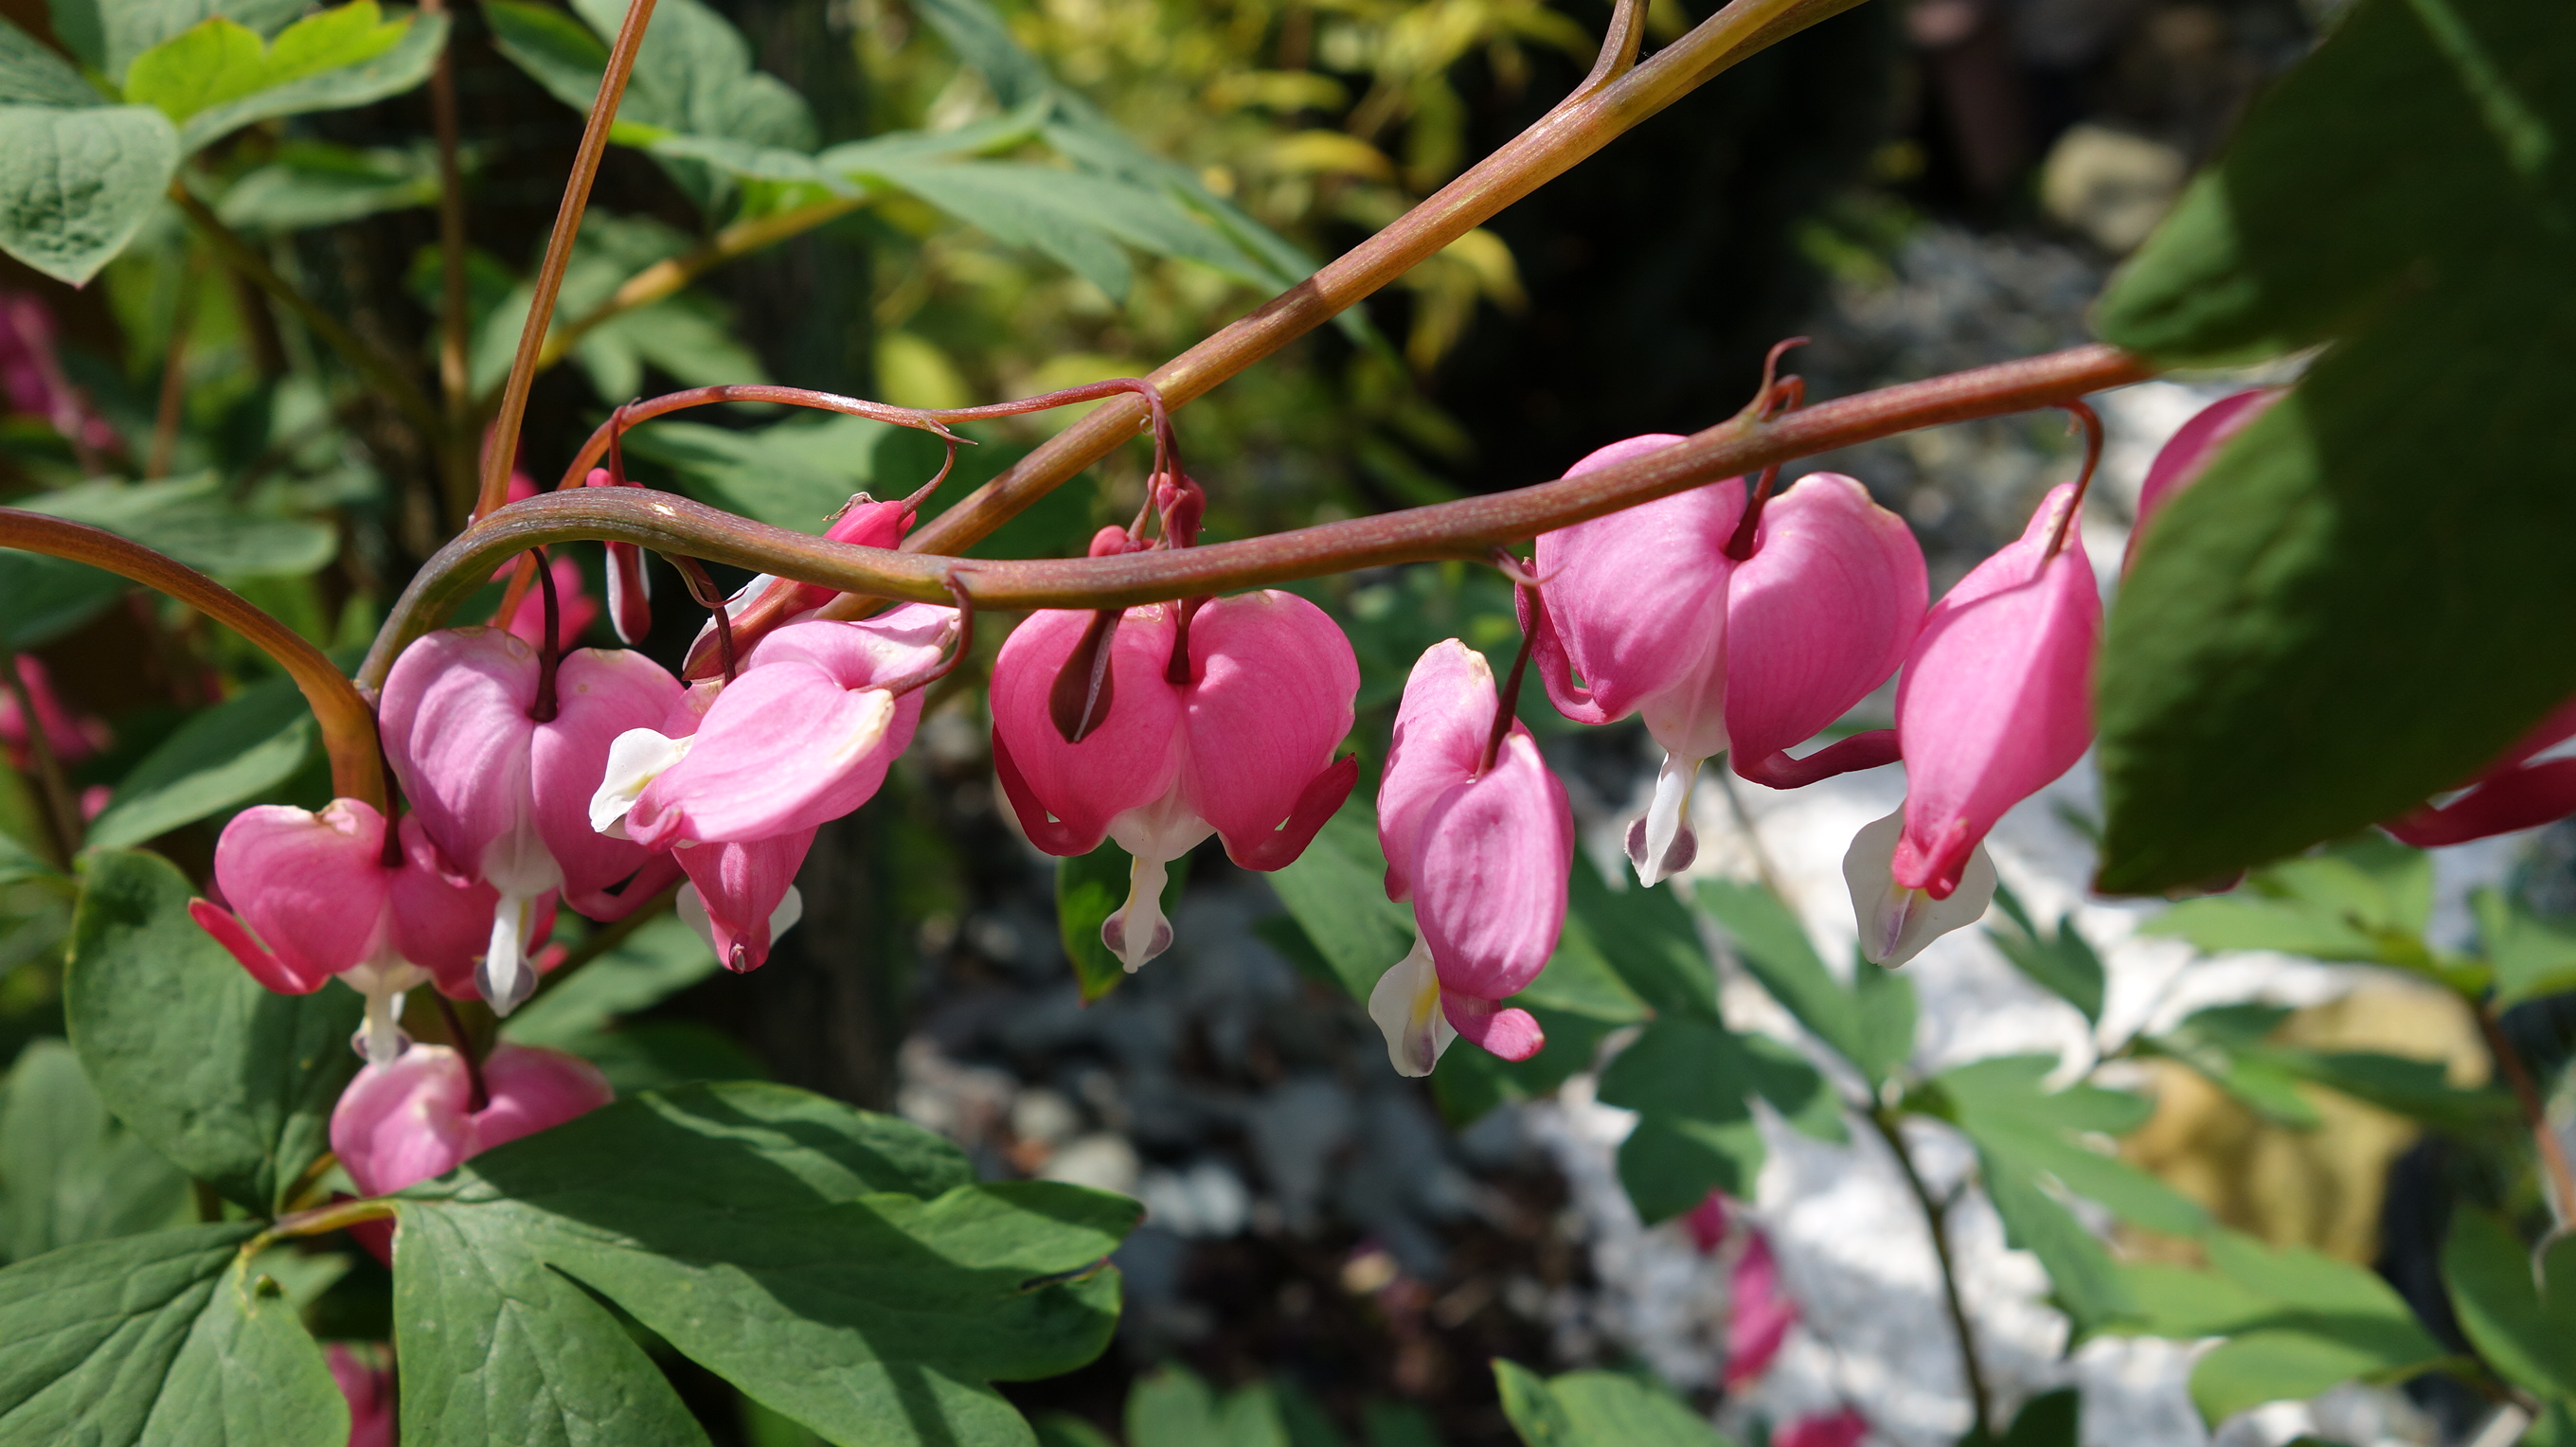 Dicentra2 by mapini - Image Abyss